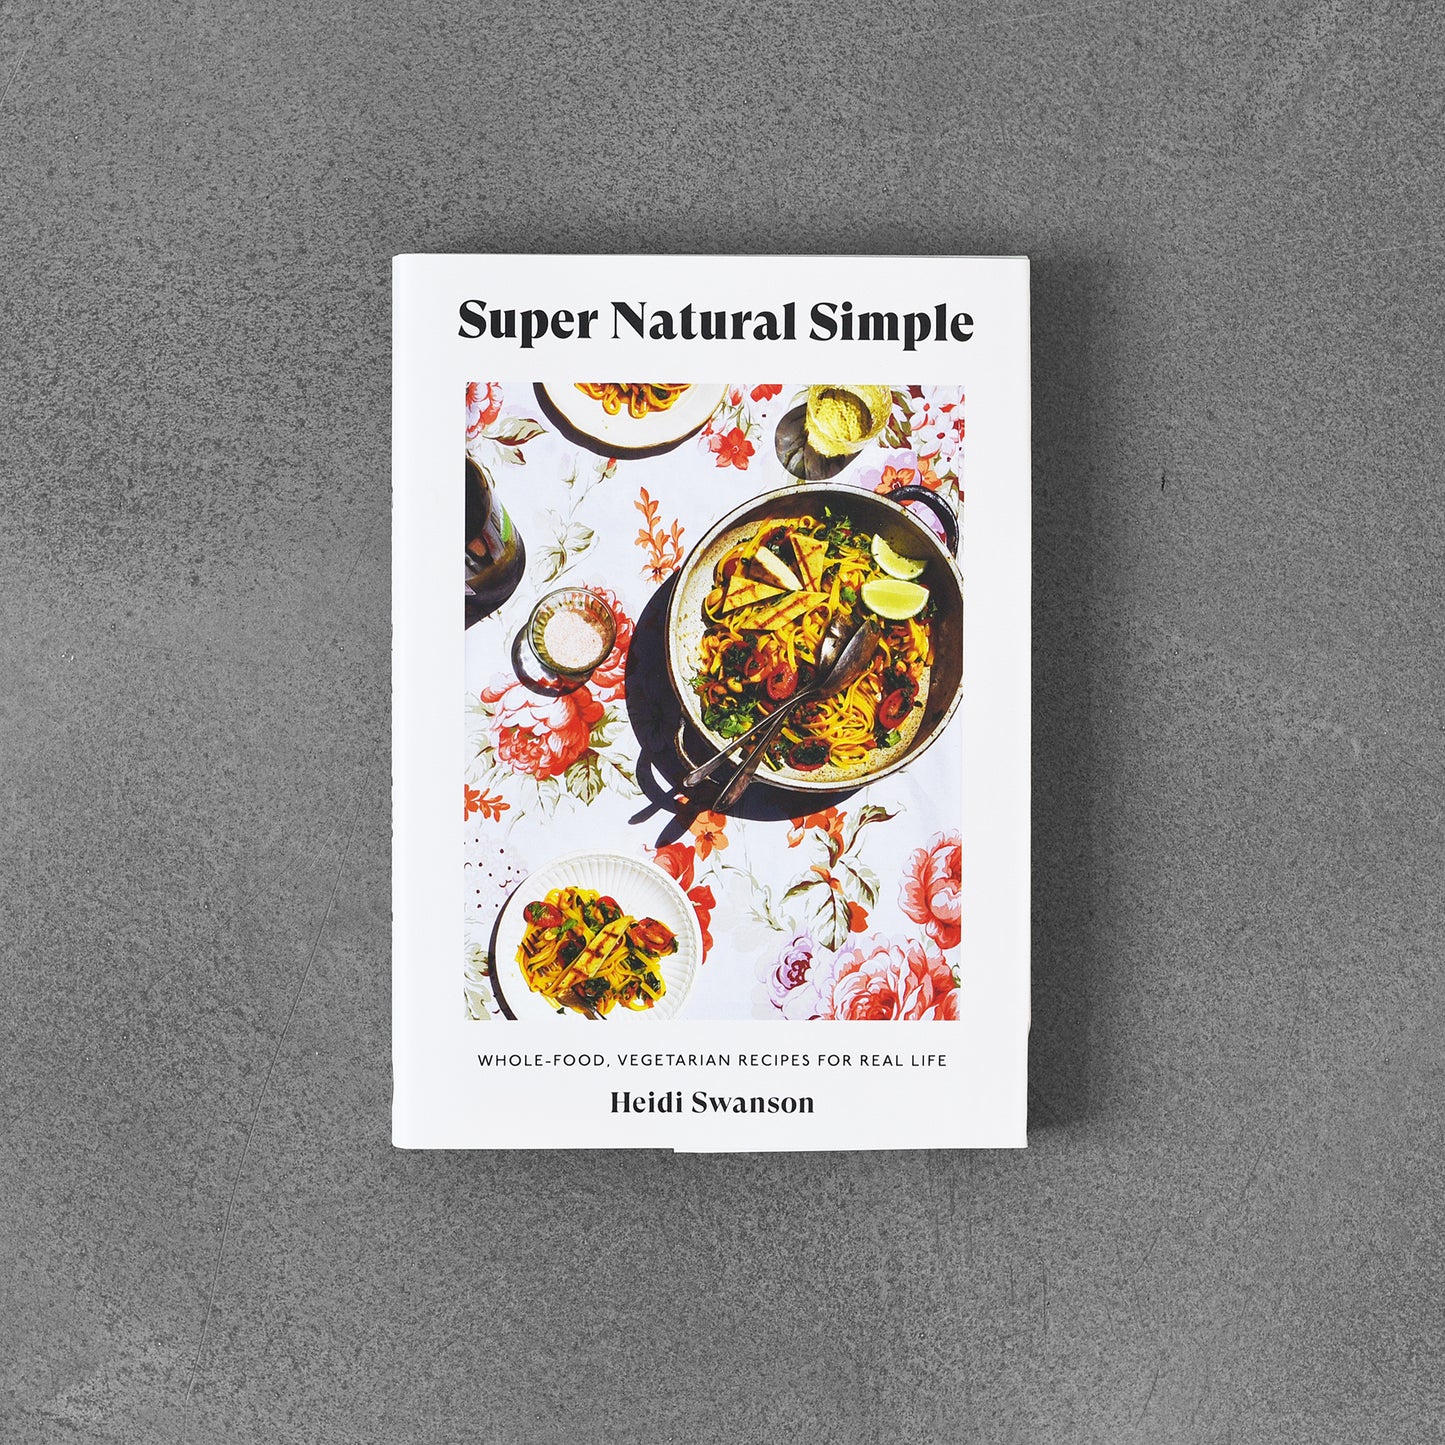 Super Natural Simple Whole-Food, Vegetarian Recipes for Real Life